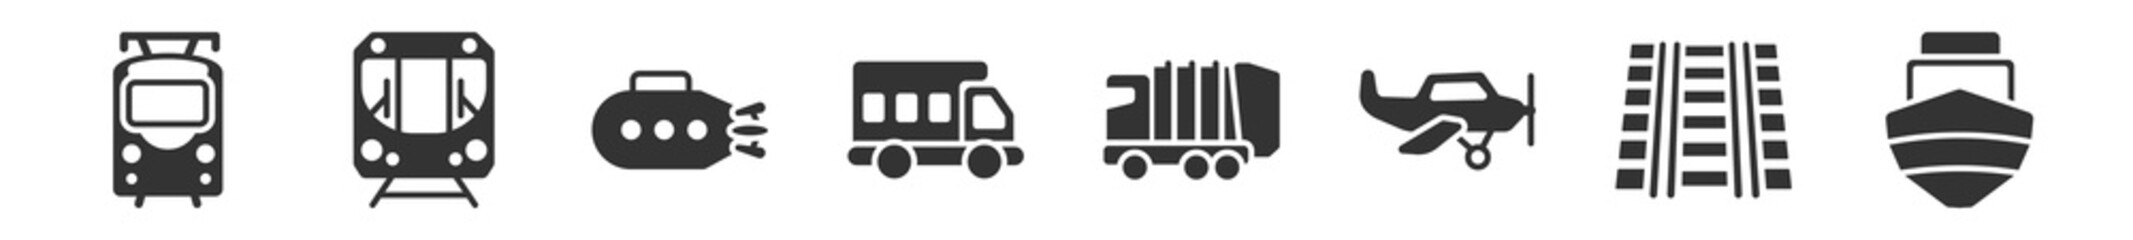 filled set of transport aytan icons. glyph vector icons such as tram front view, metro, small submarine, camper car, litter car, boat front view. vector illustration.